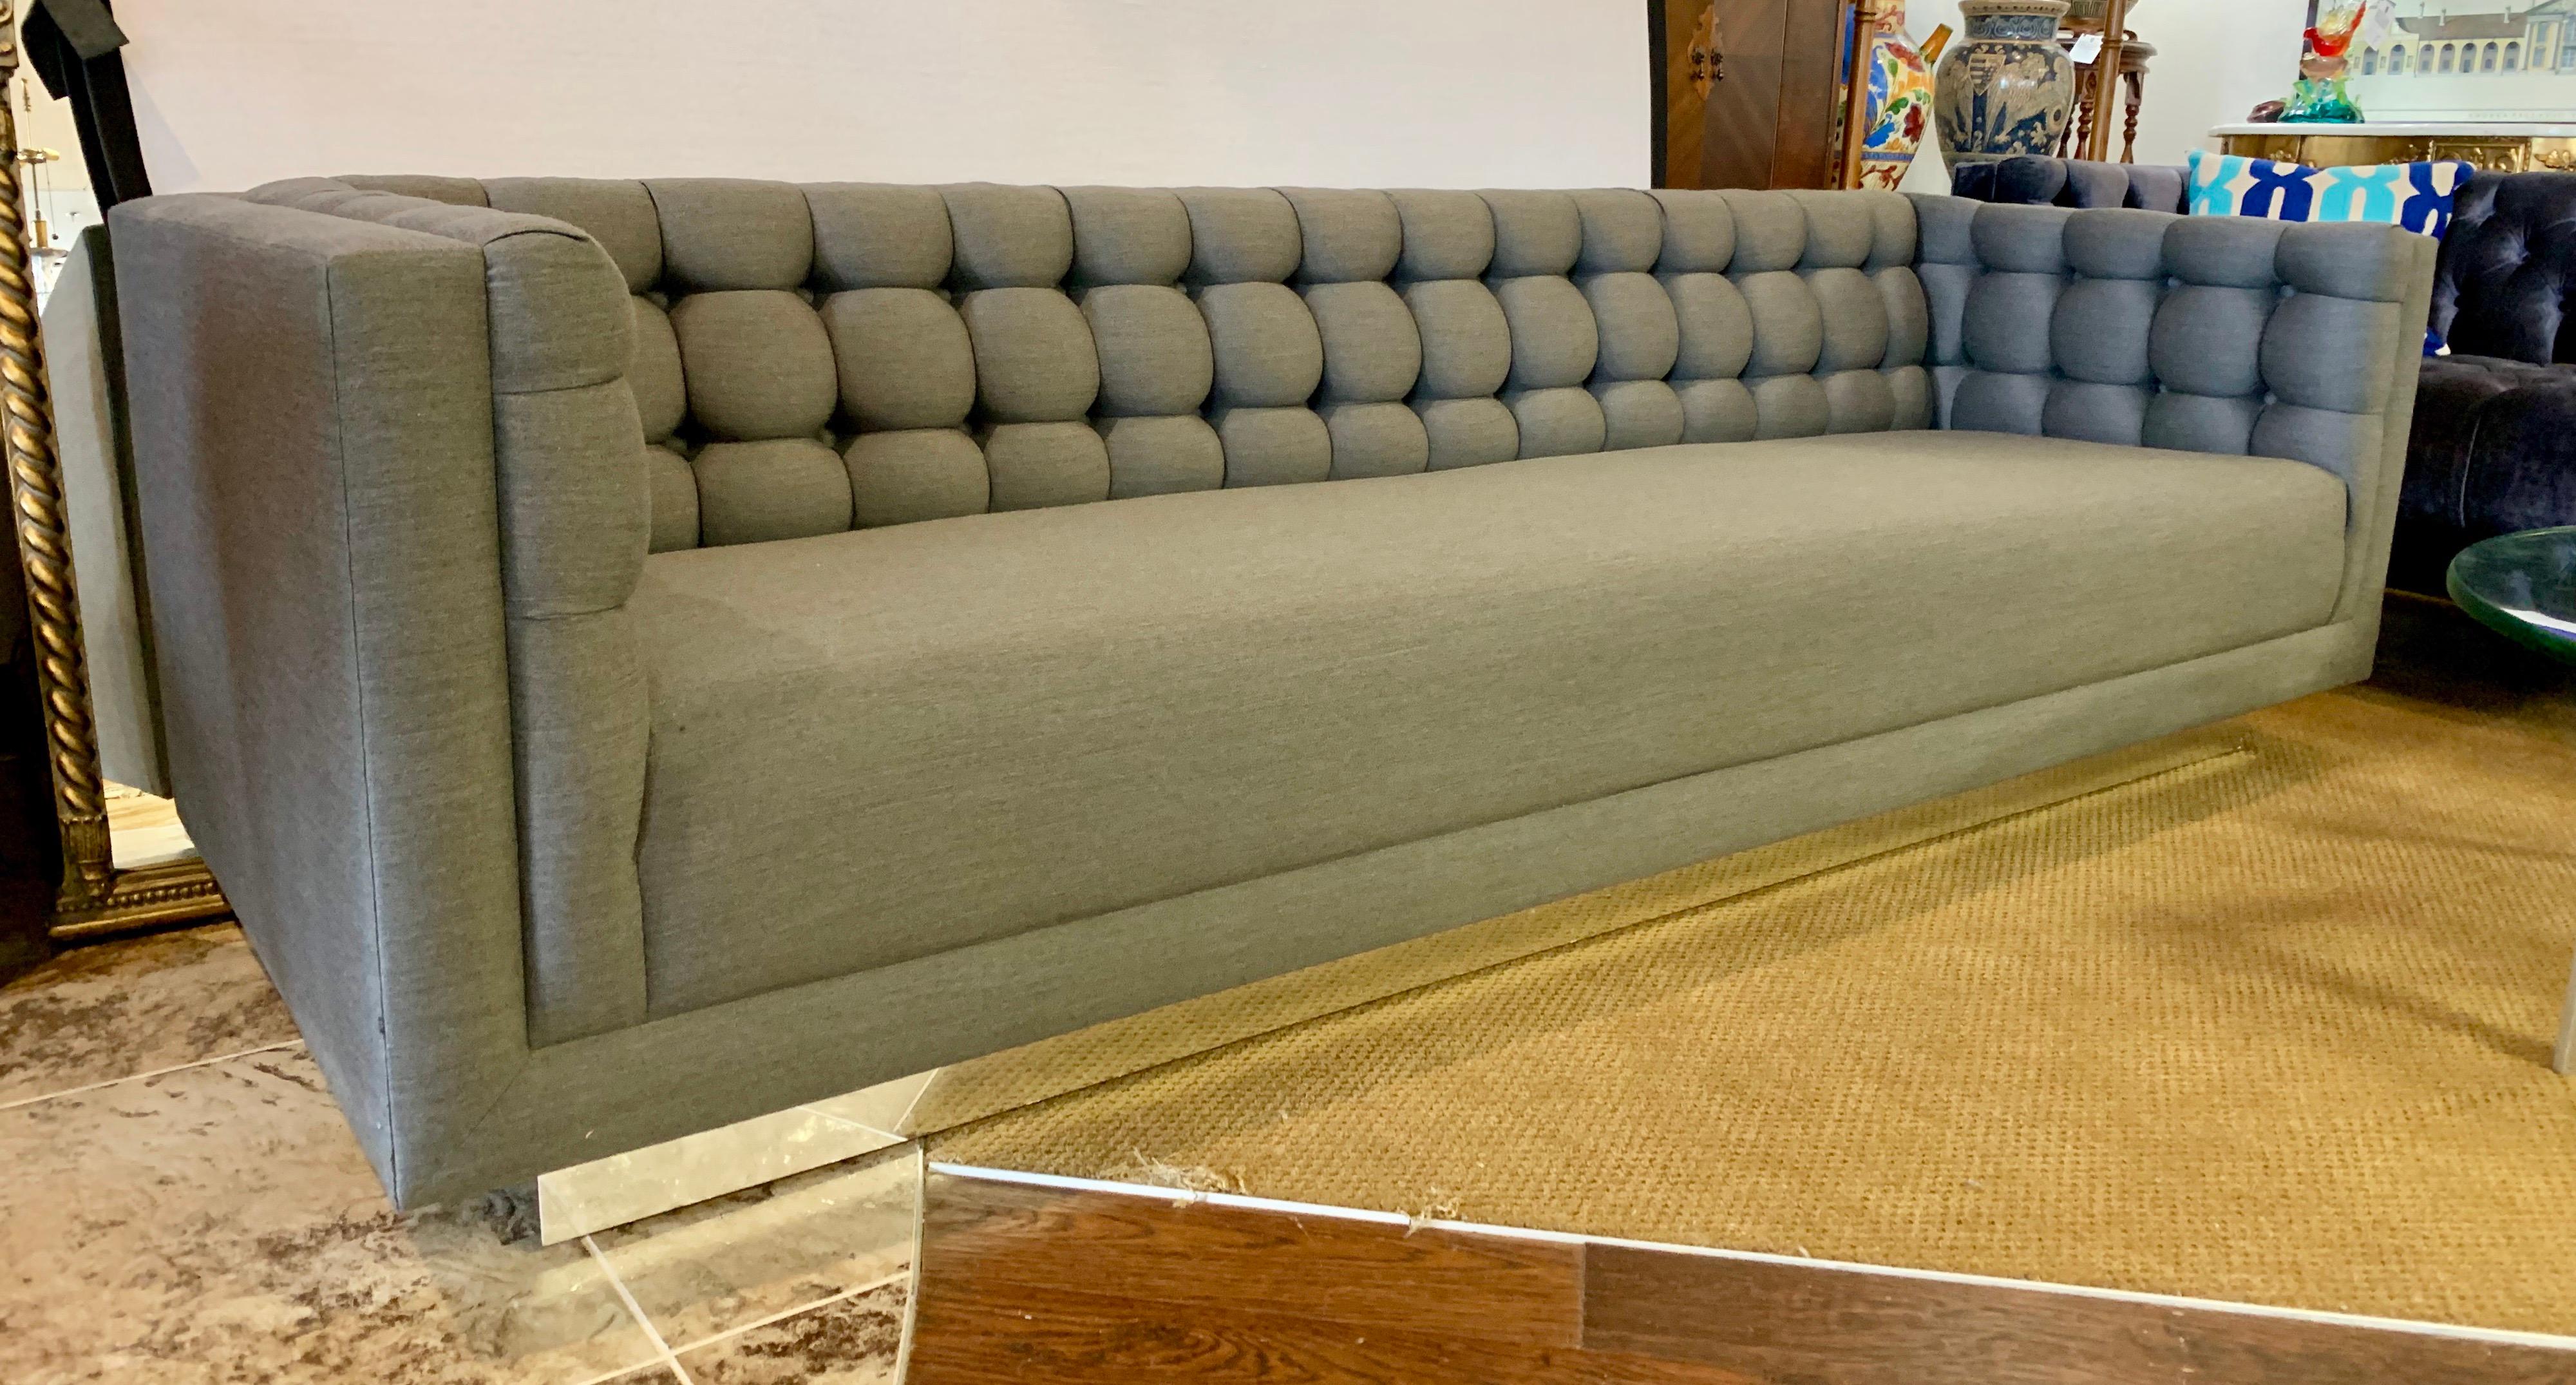 Stunning Milo Baughman Classic floating sofa. Custom with luxurious medium gray fabric.
The tufting looks like a work of art. The base floats and has chrome all around. An exceptional
piece with newer upholstery.